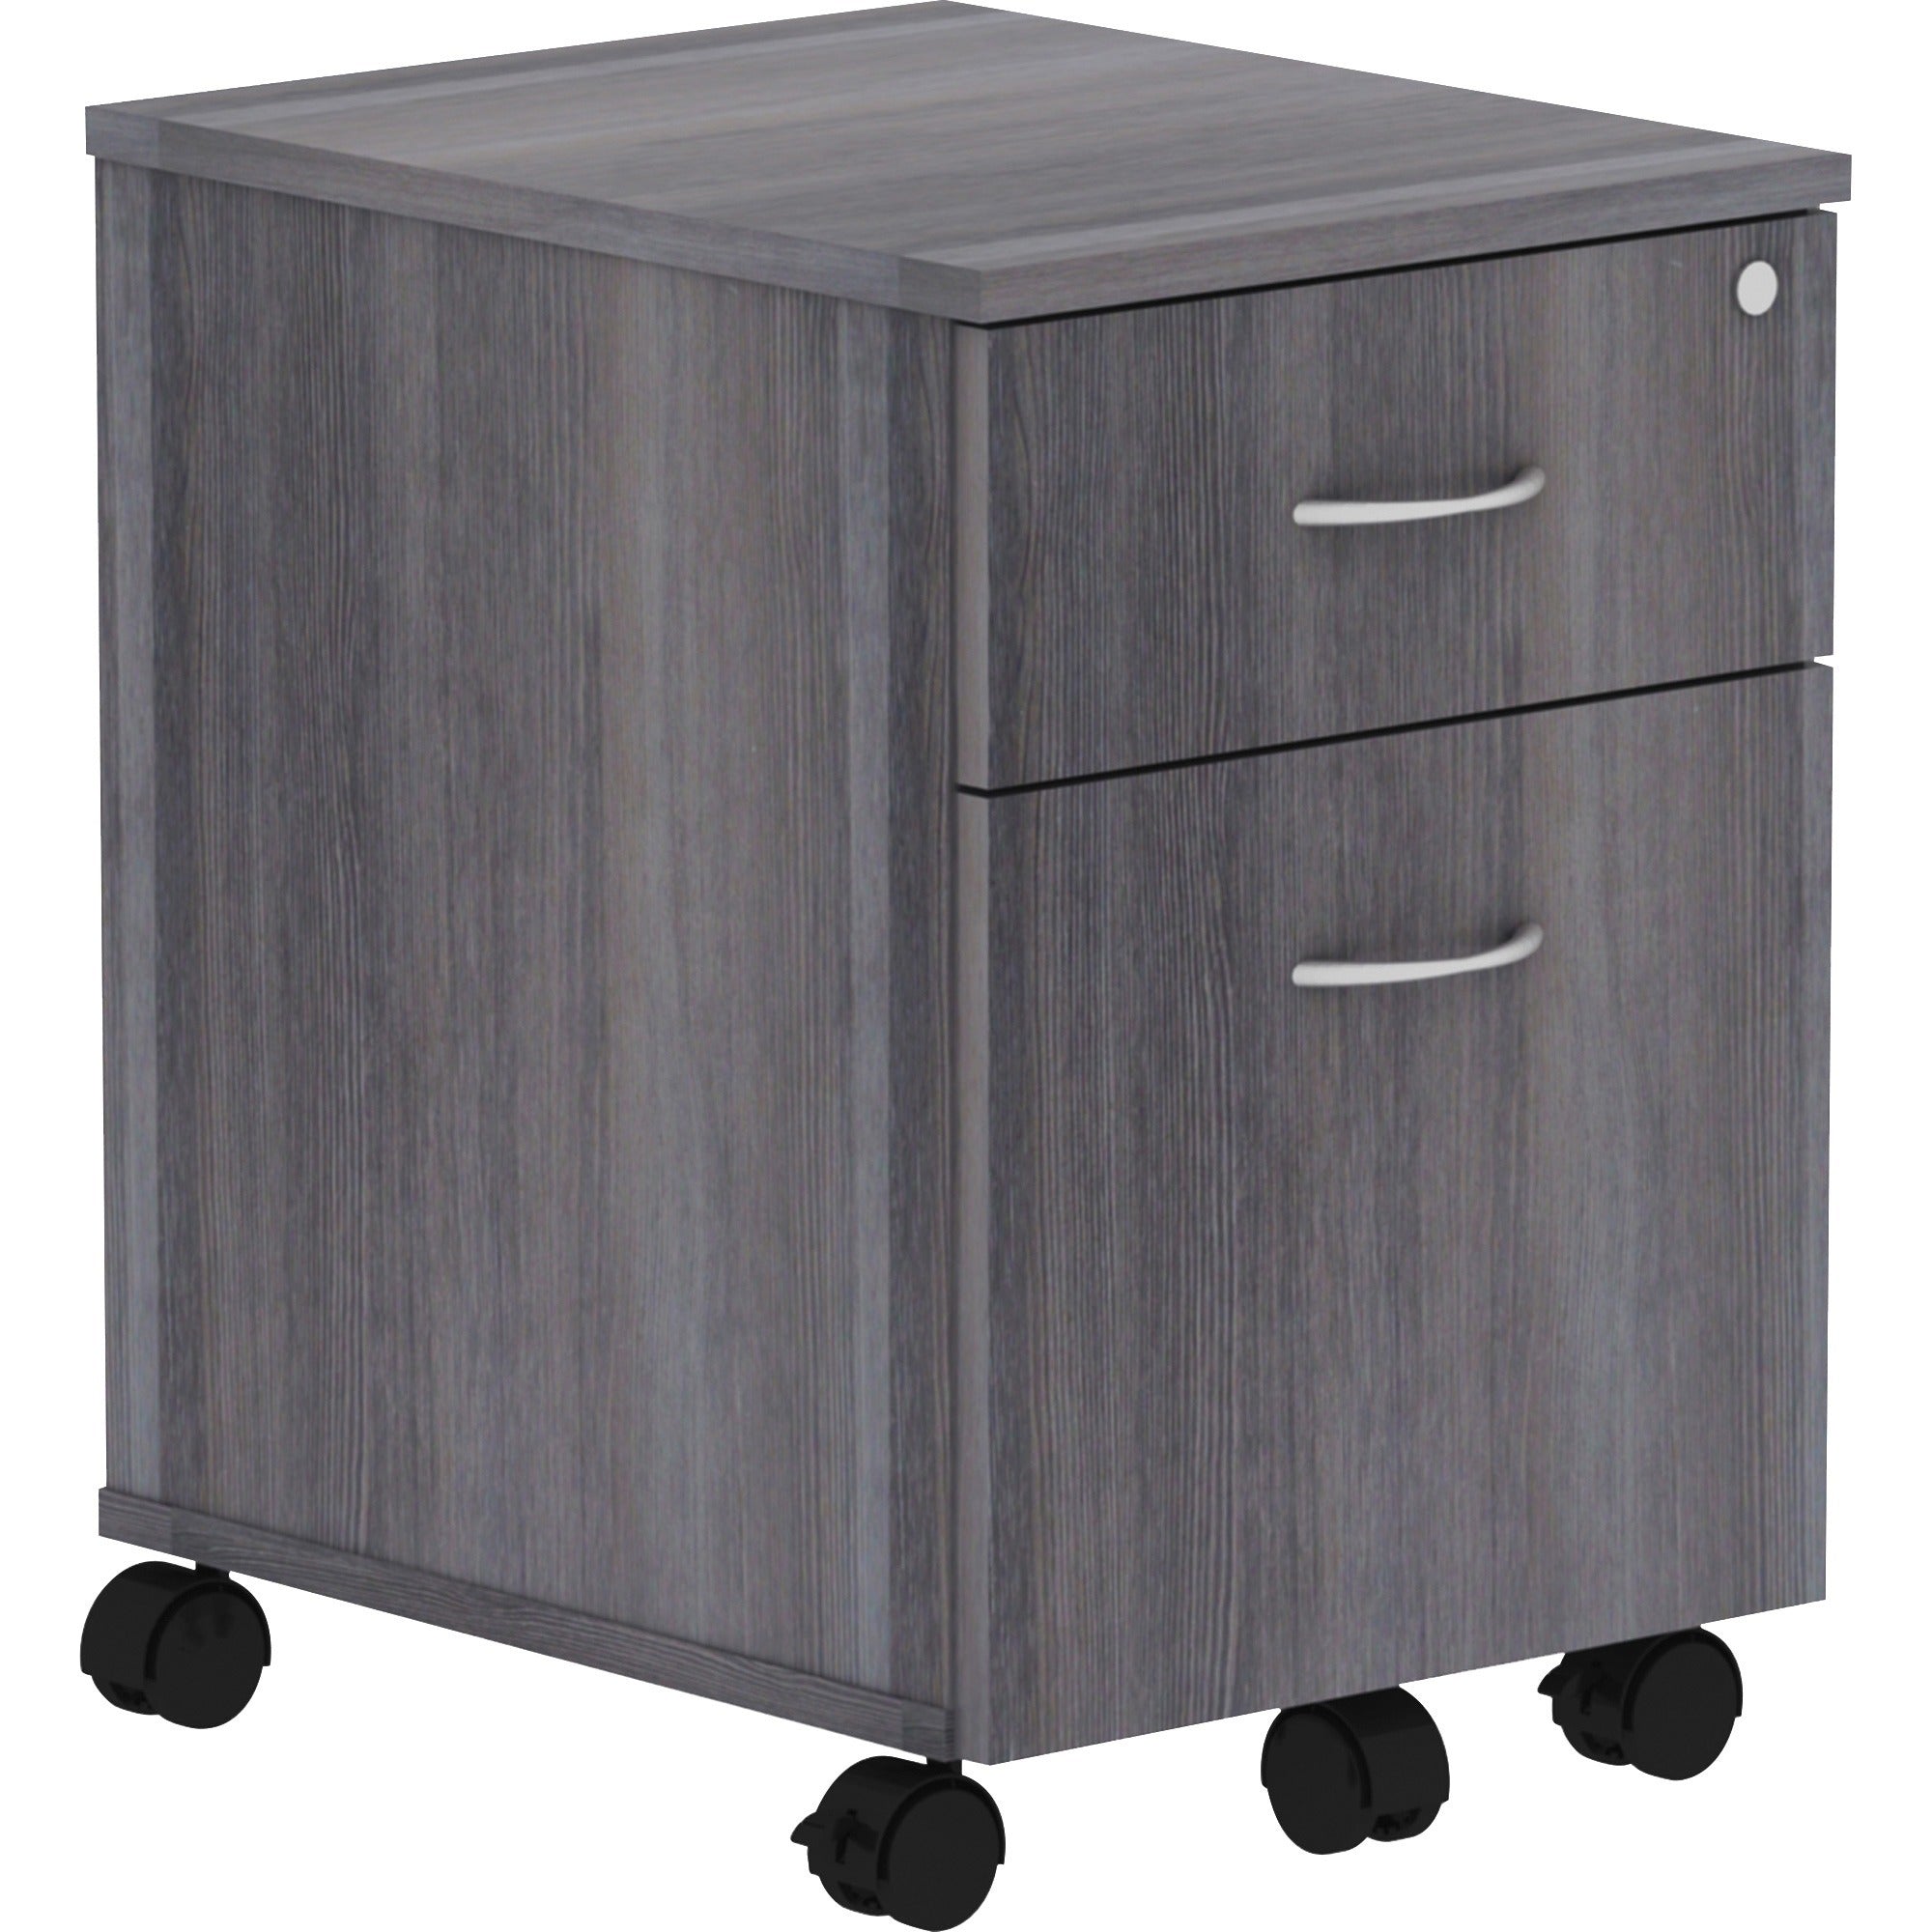 lorell-relevance-series-2-drawer-file-cabinet-158-x-199229-2-x-file-box-drawers-finish-weathered-charcoal-laminate_llr16217 - 1